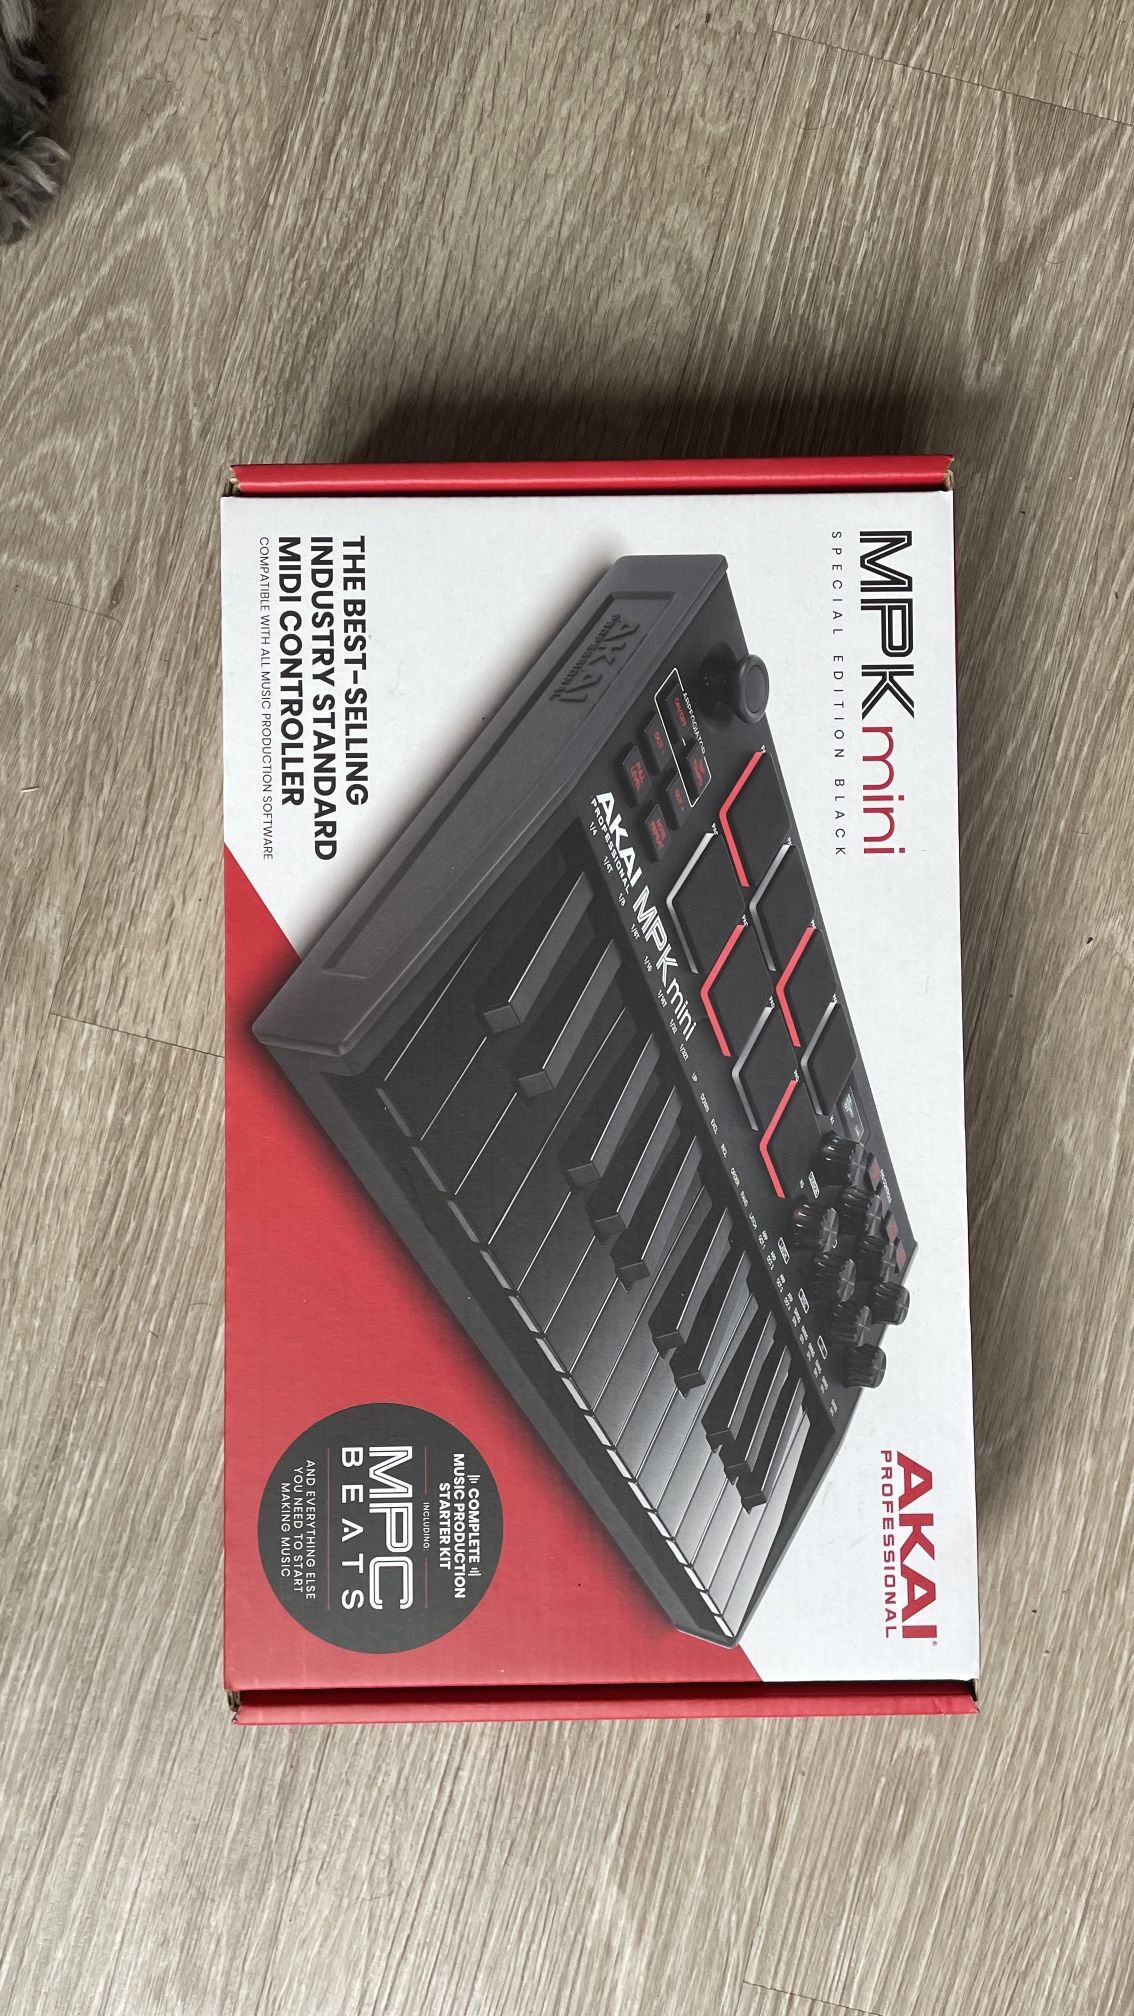 AKAI Professional MPK Mini MK3 - 25 Key USB MIDI Keyboard Controller With 8 Backlit Drum Pads, 8 Knobs and Music Production Software included, Black